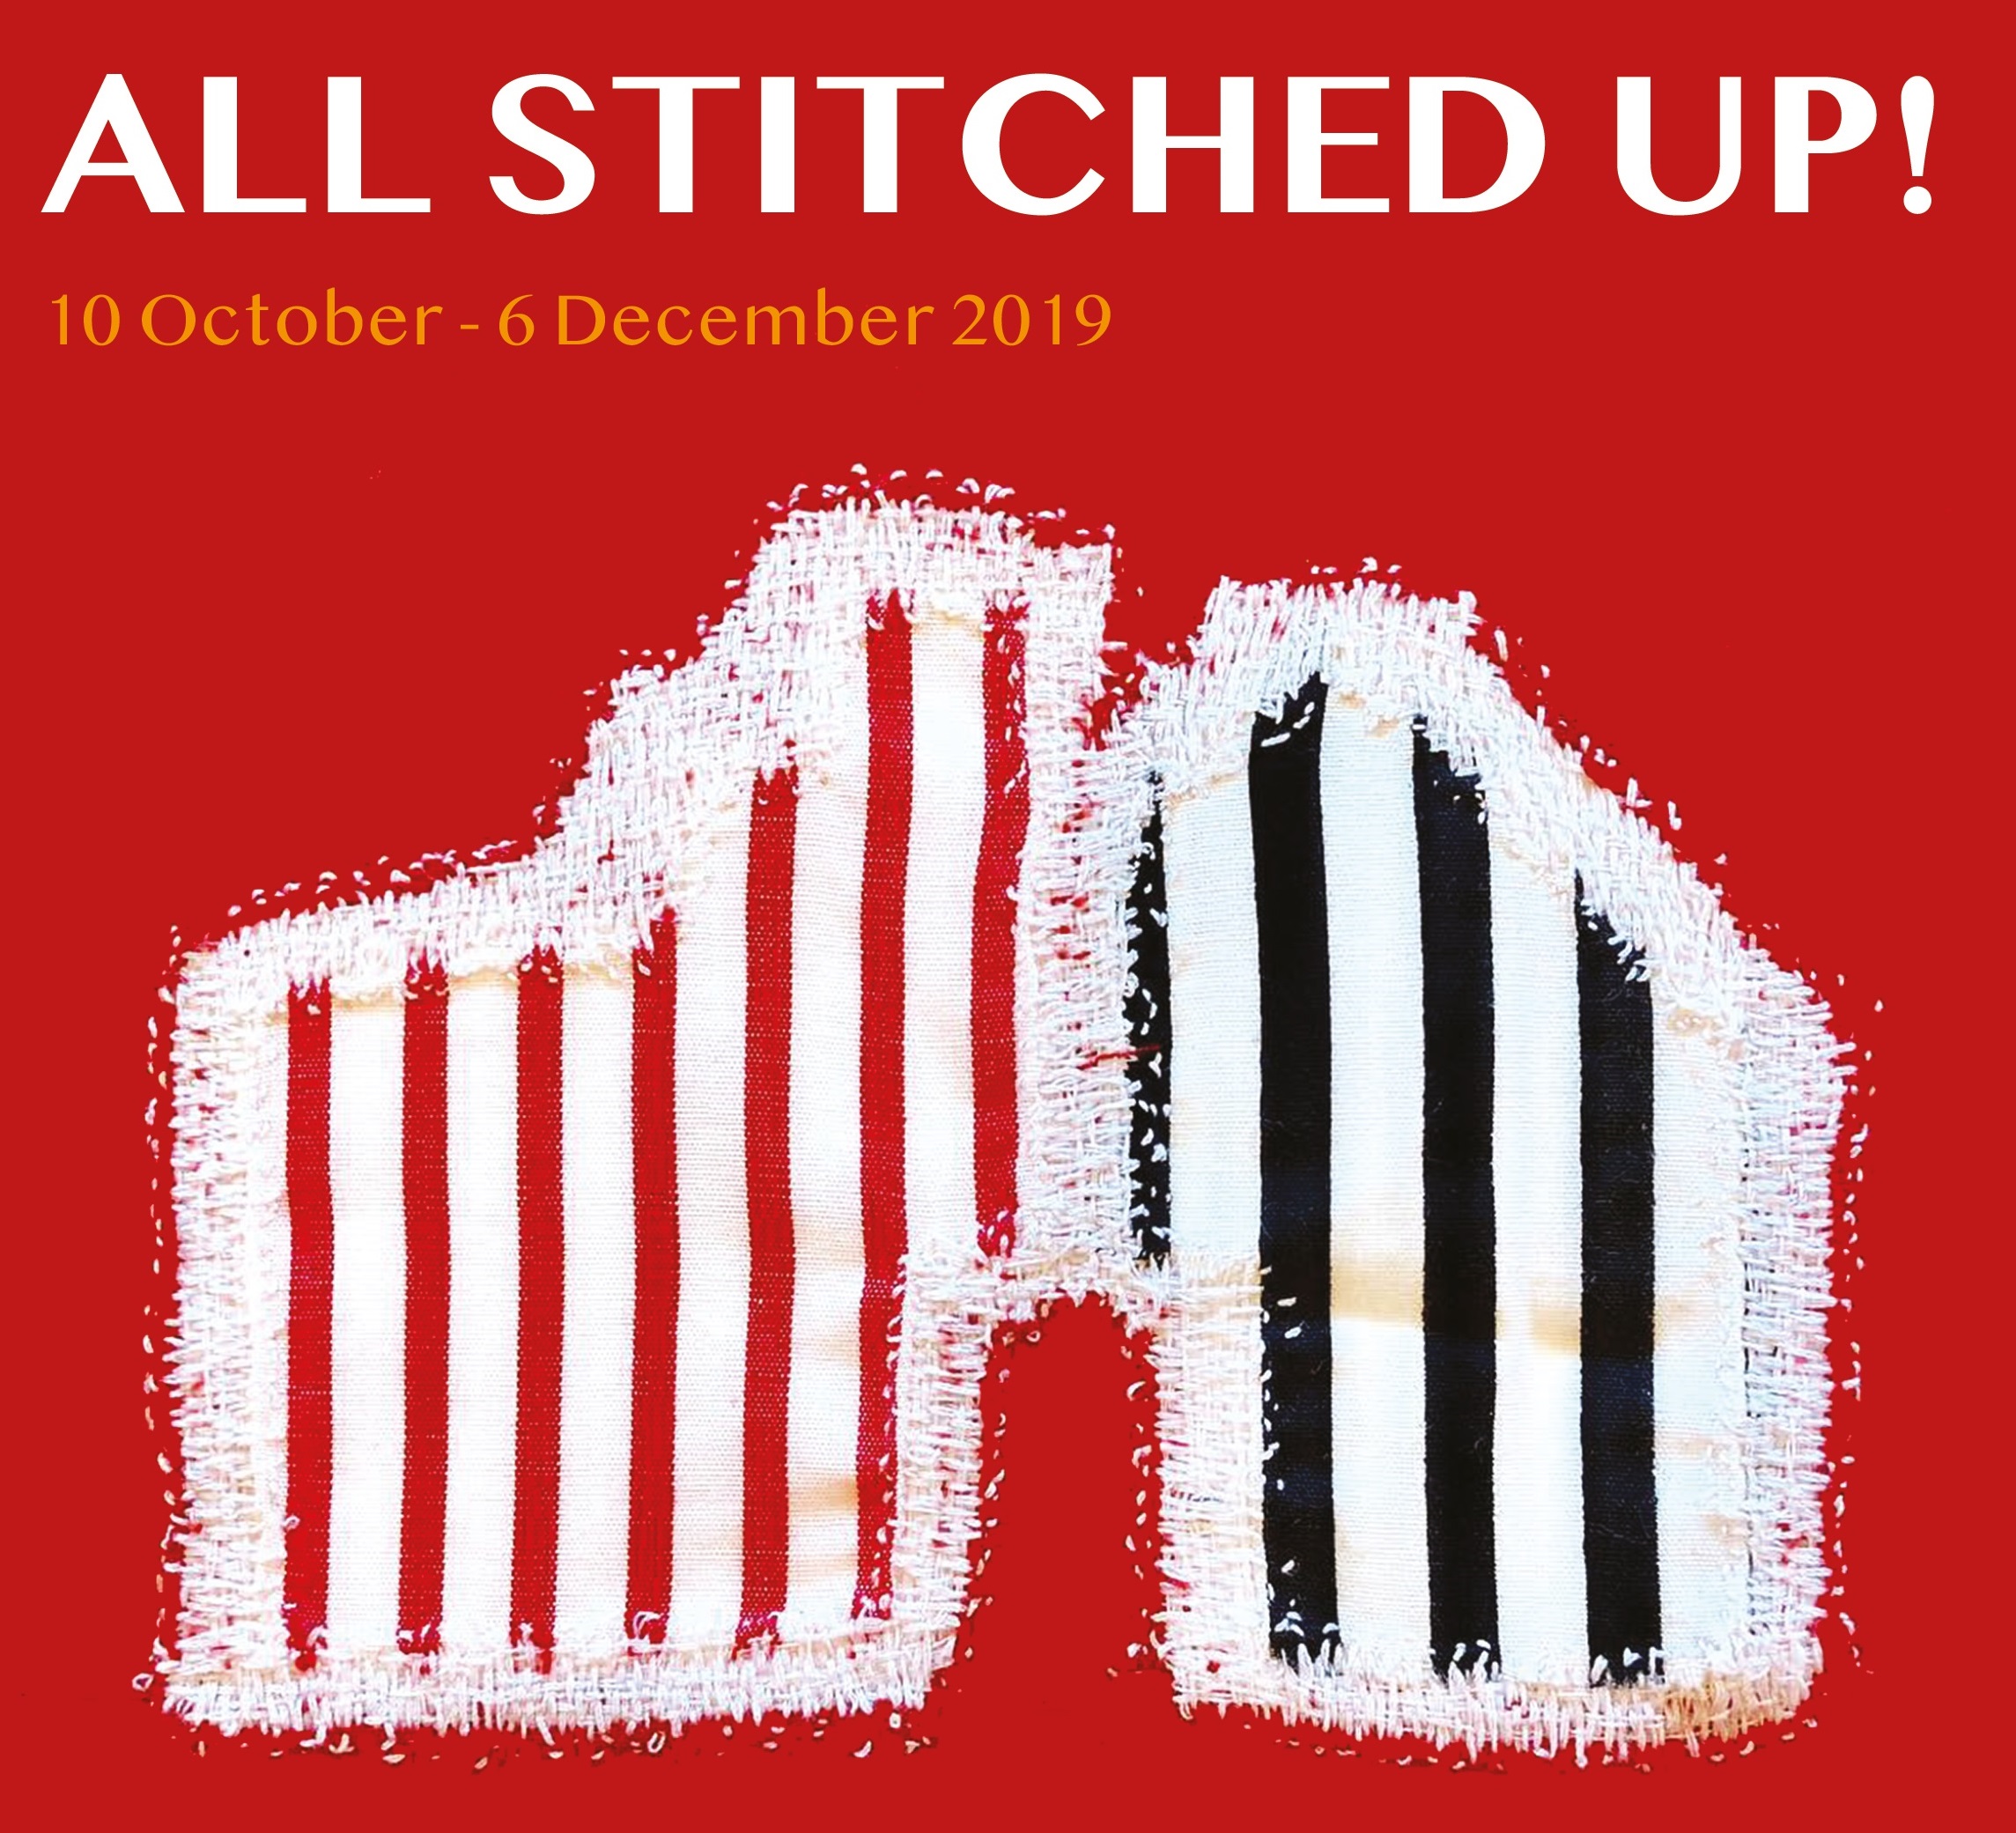 All Stitched Up! textile art exhibition at The Mill